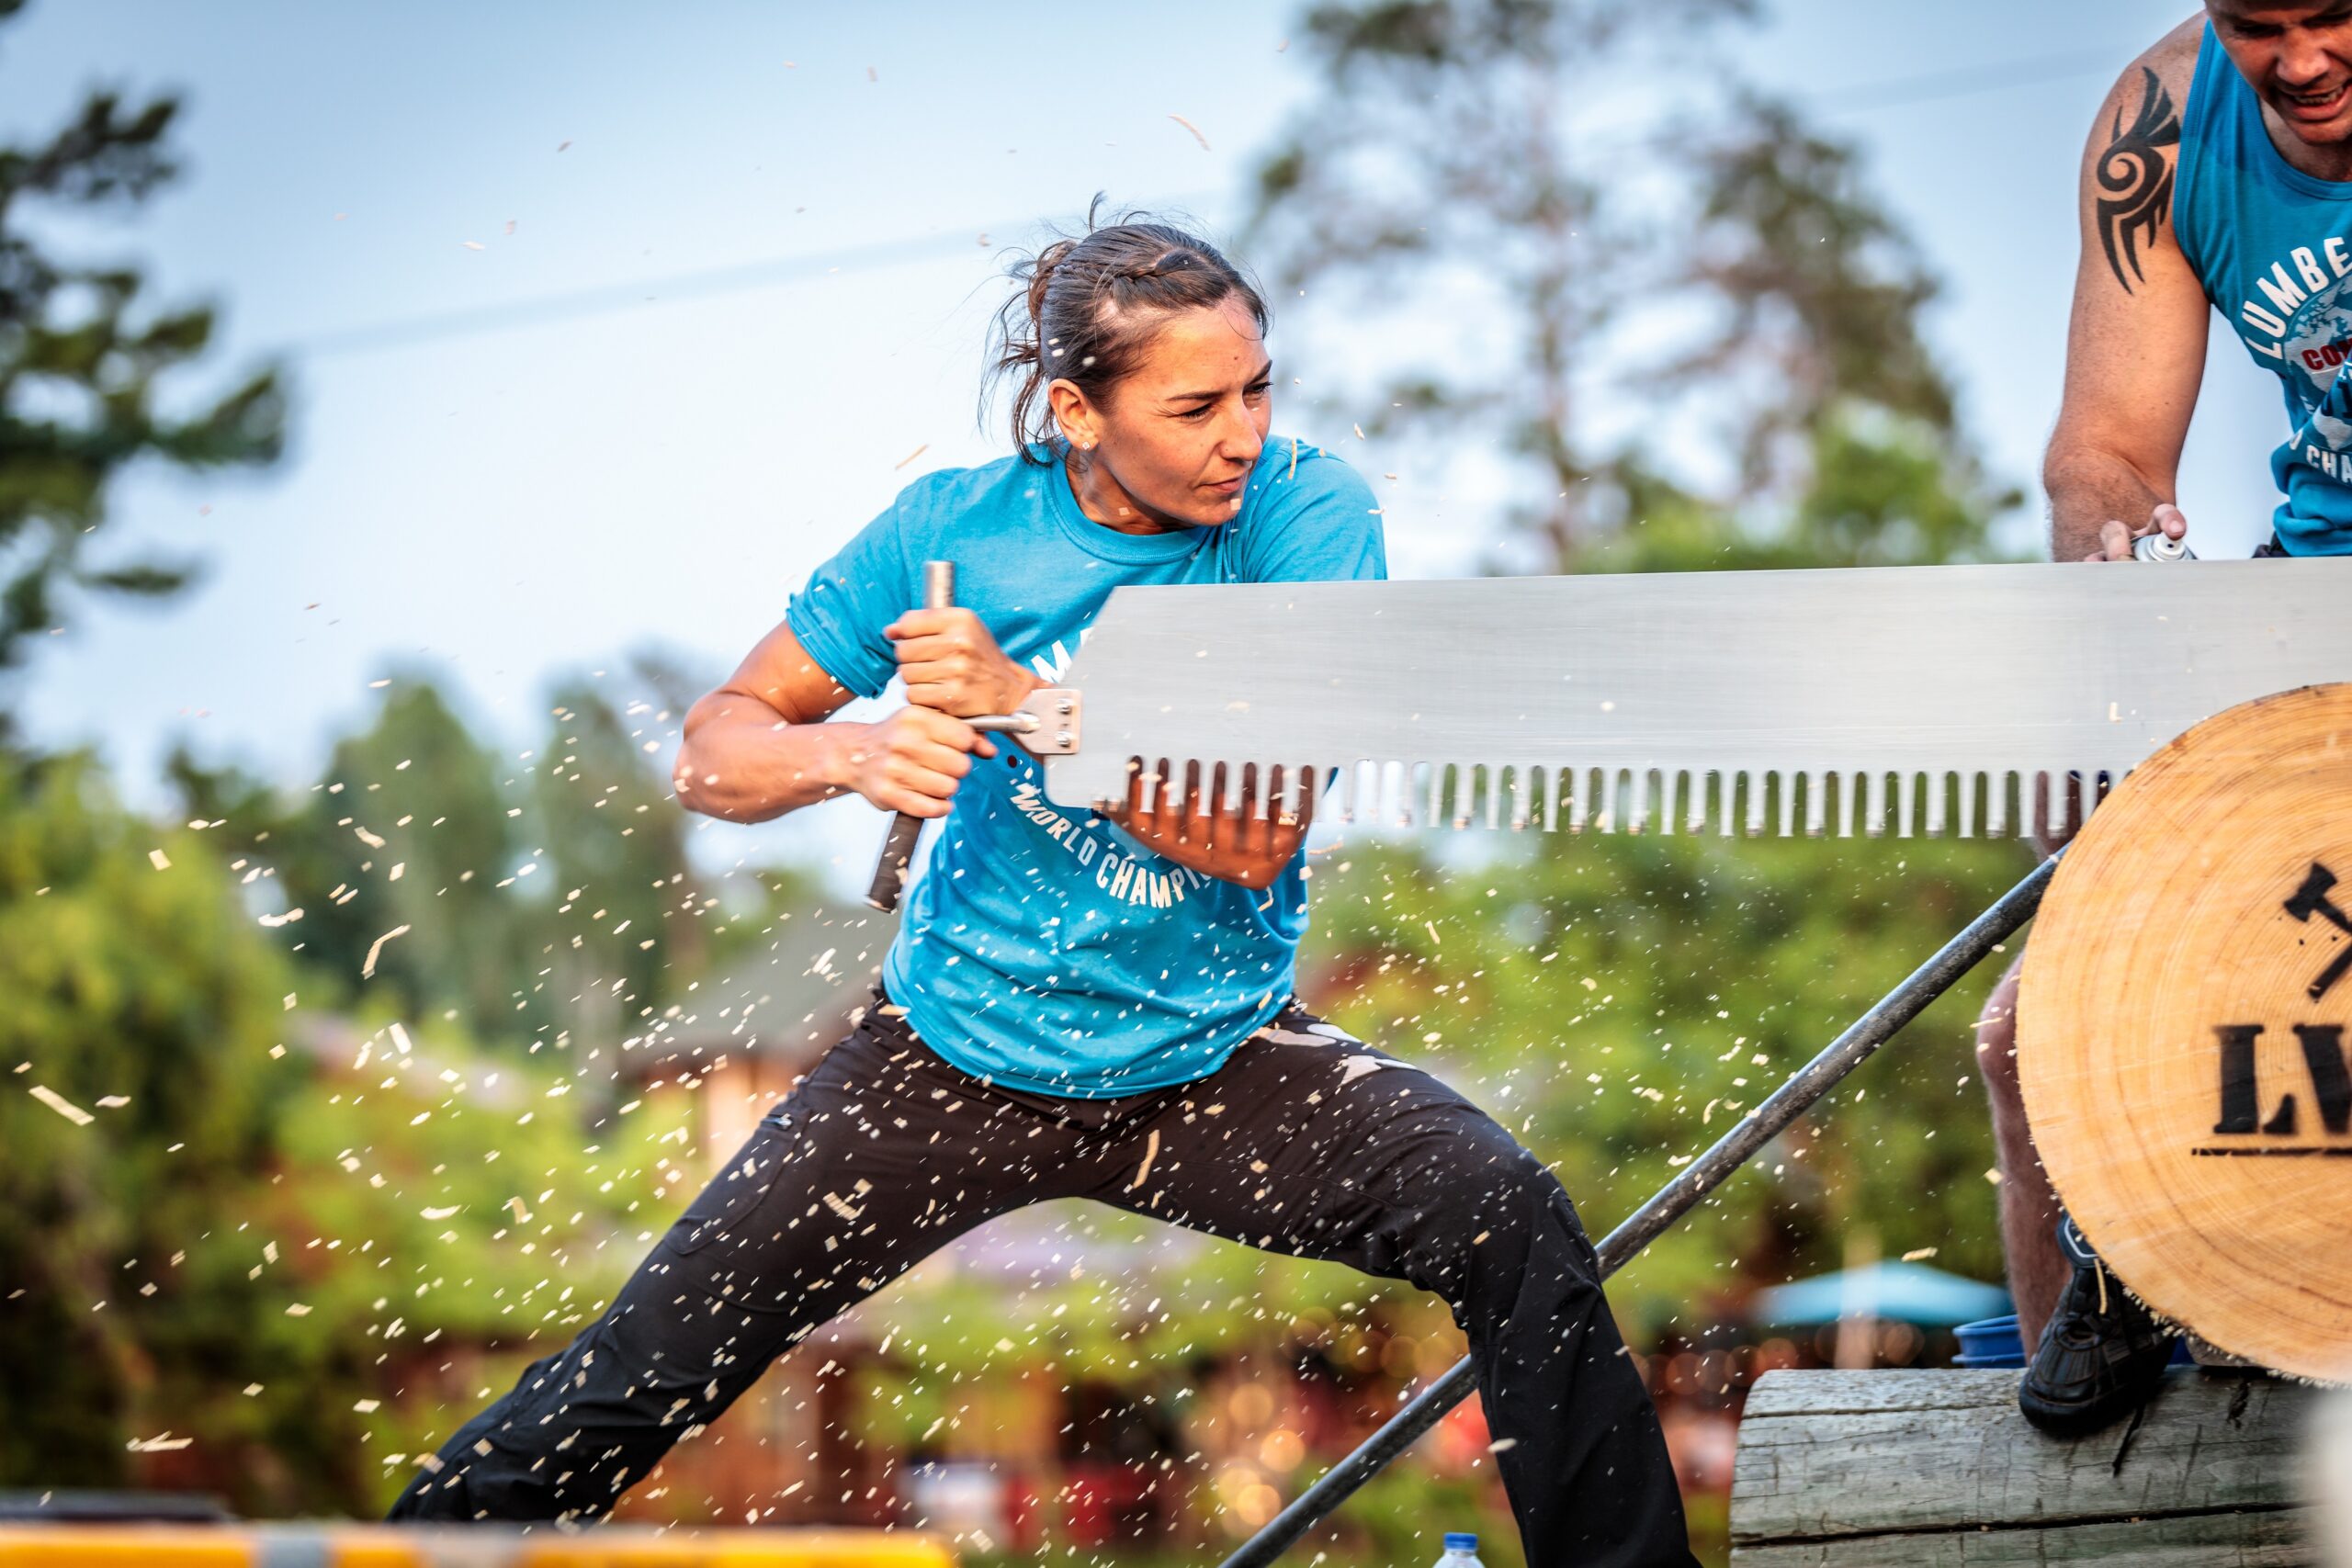 Lumberjack World Championships Showcases Sawyers, Log-Rollers, Pole-Climbers And More